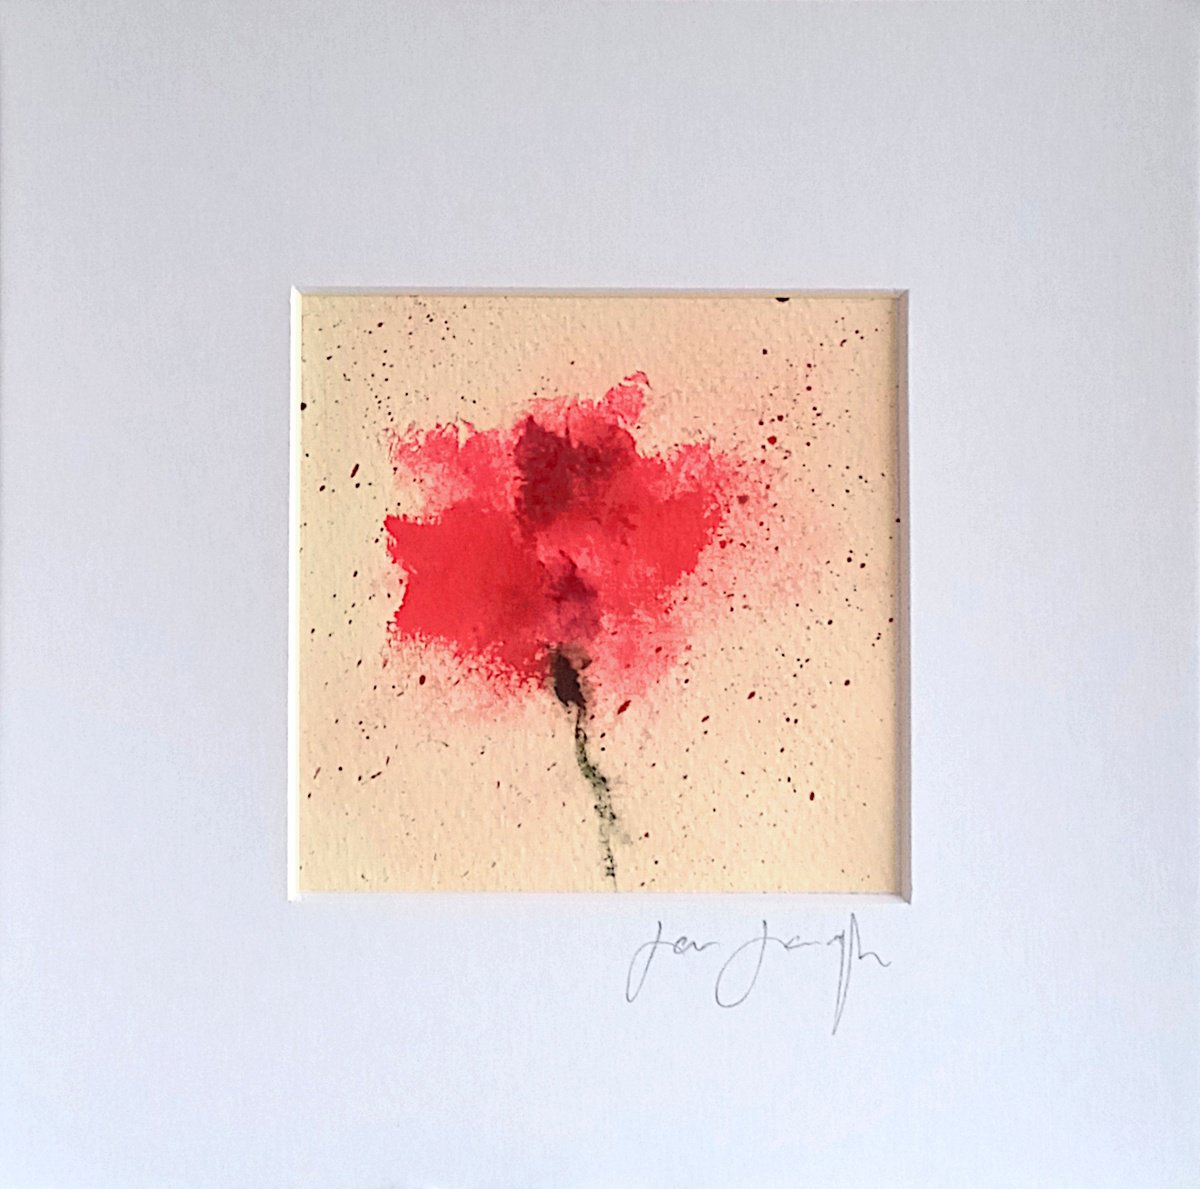 Floral 24 - Small abstract framed floral painting by Jon Joseph